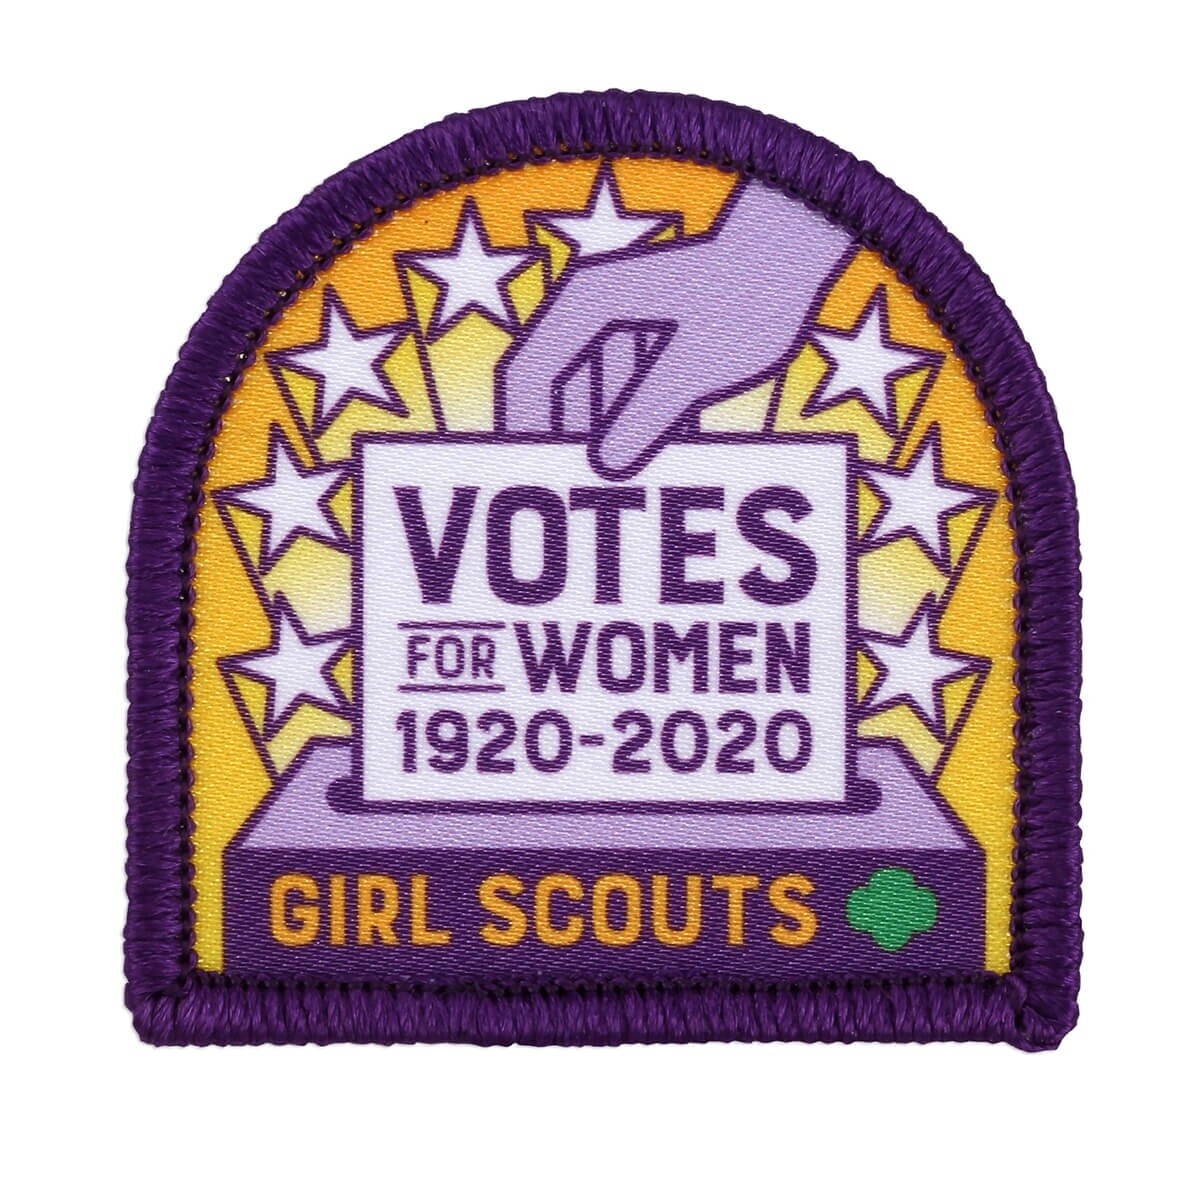 Girl Scout Votes For Women 1920 To 2020 Sew-On Patch